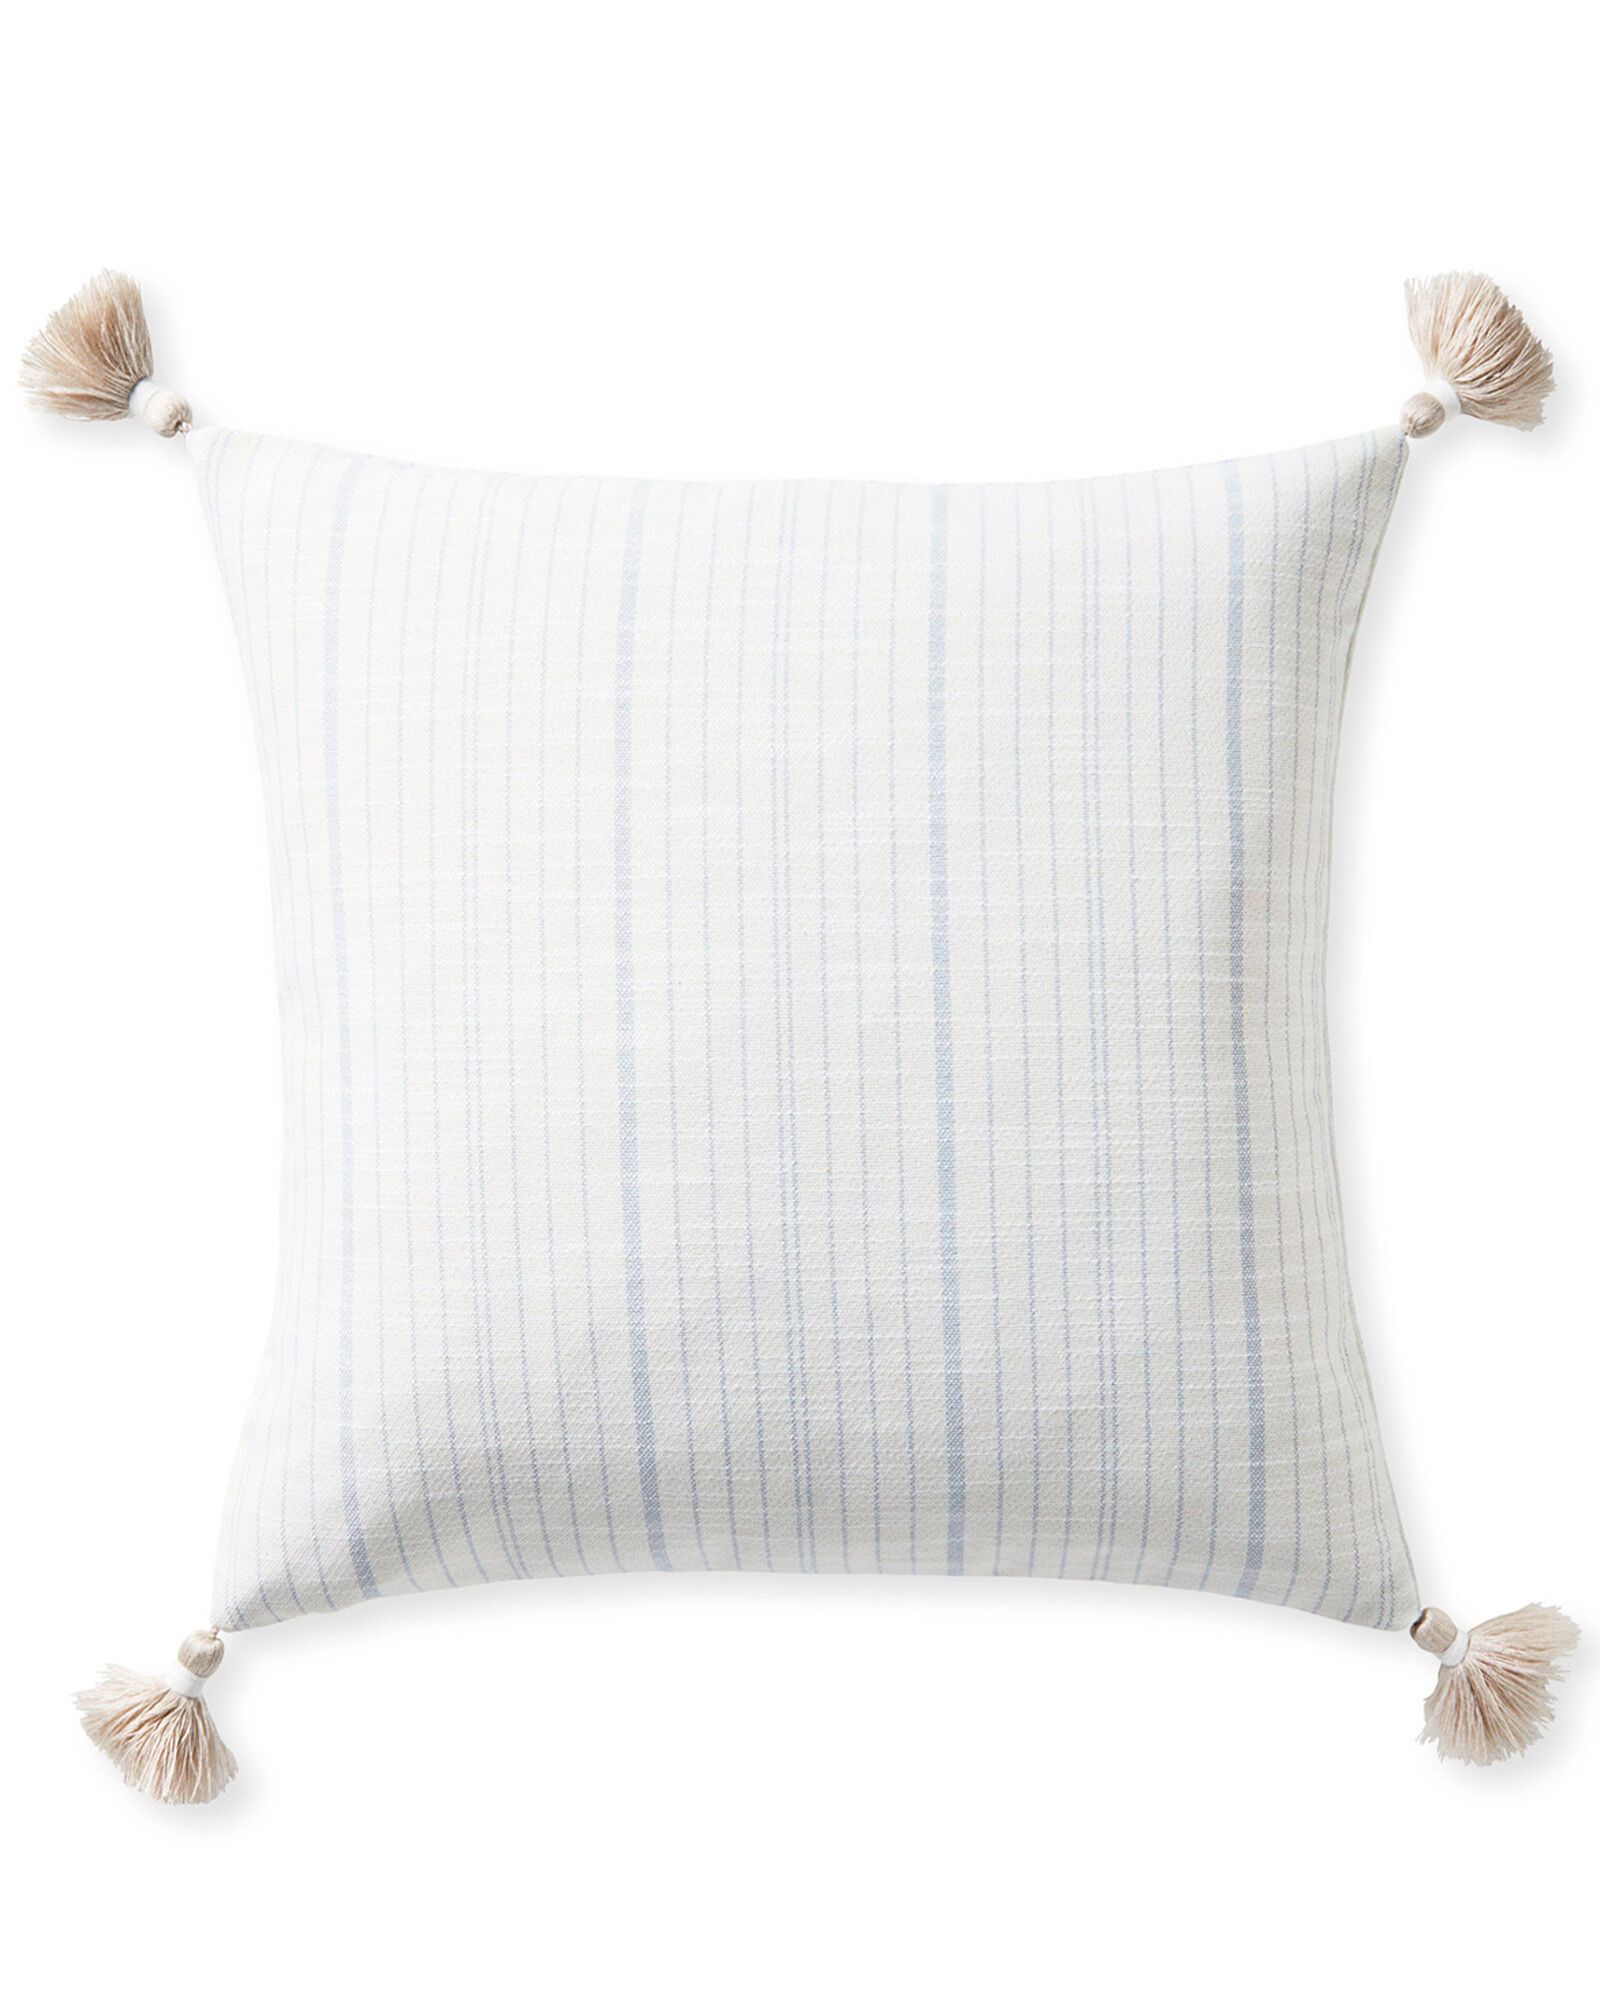 Surf Stripe Pillow Cover | Serena and Lily